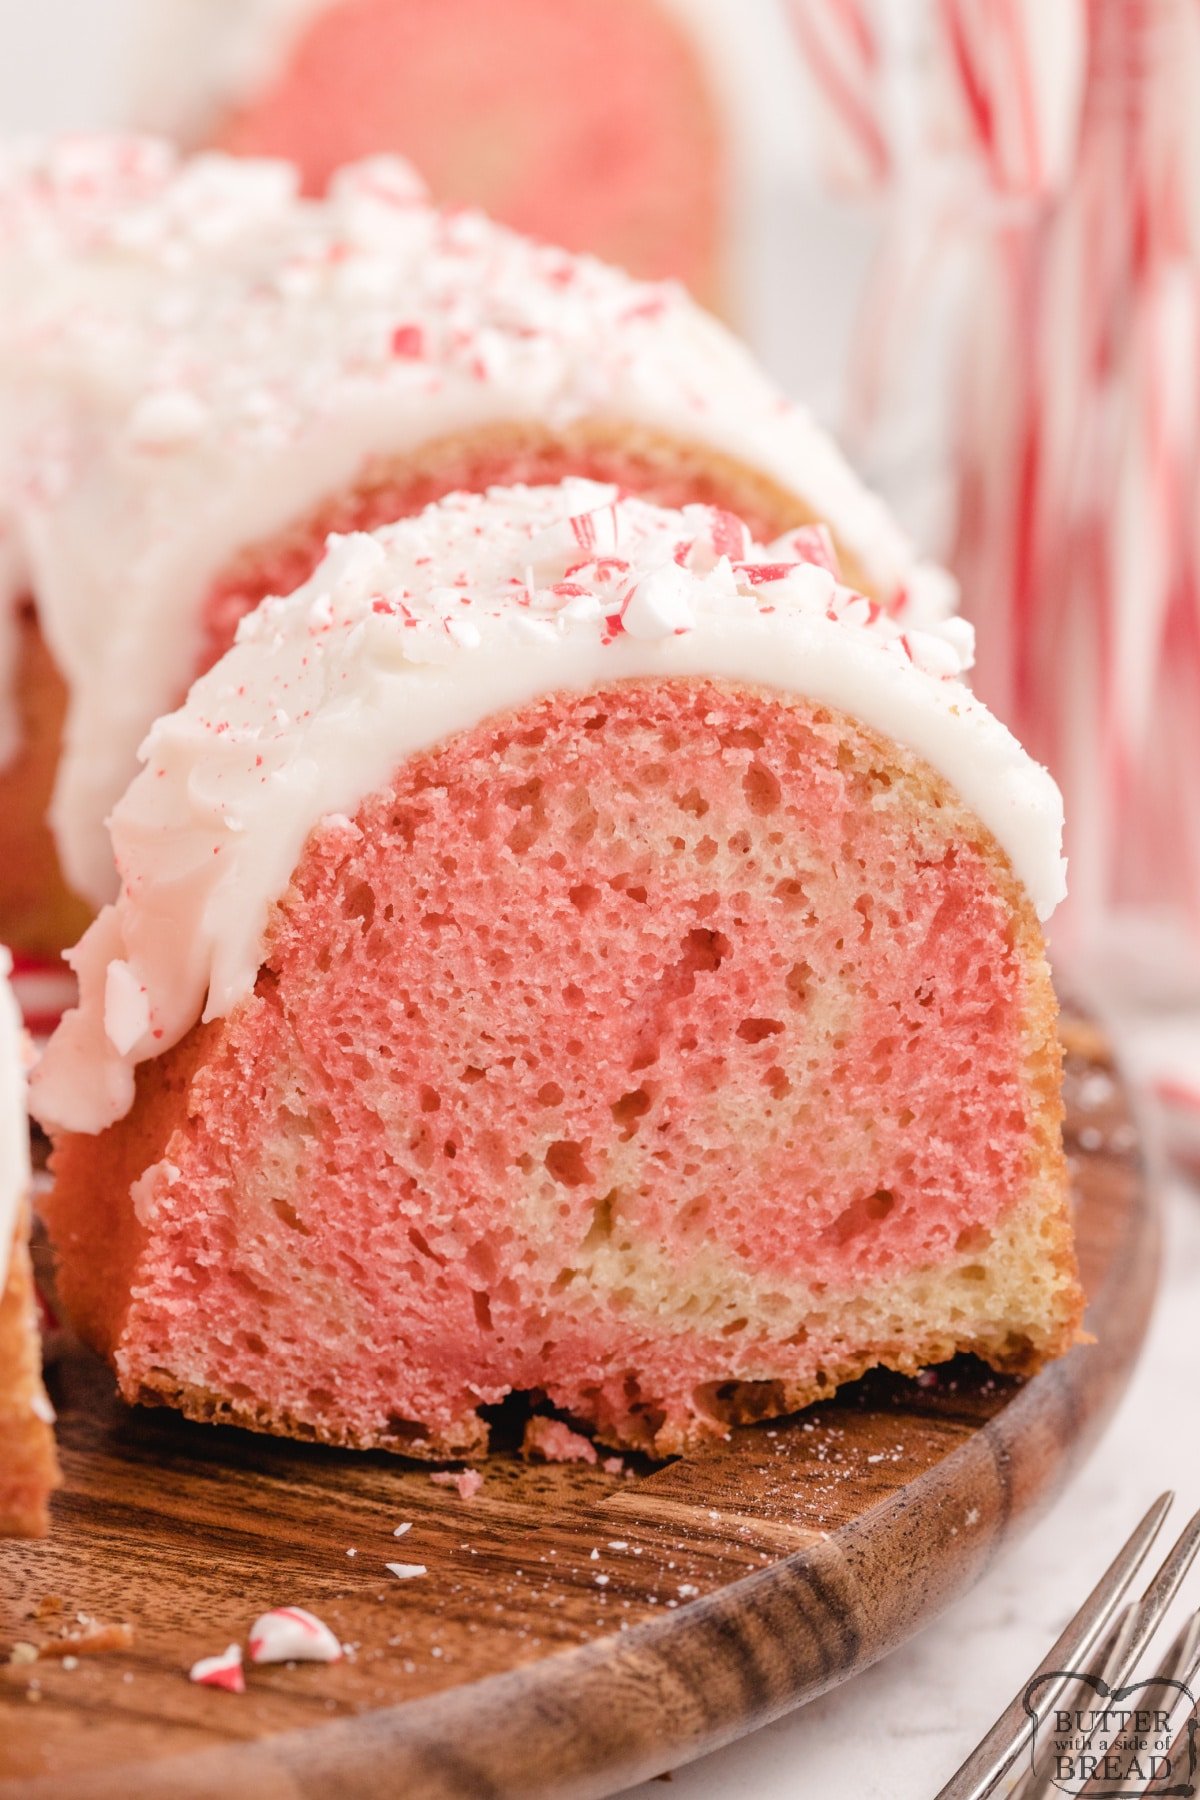 Swirled Peppermint Bundt Cake is a simple, from-scratch cake recipe flavored with peppermint and topped with a thick, creamy glaze. Beautiful peppermint cake recipe that is absolutely delicious too!